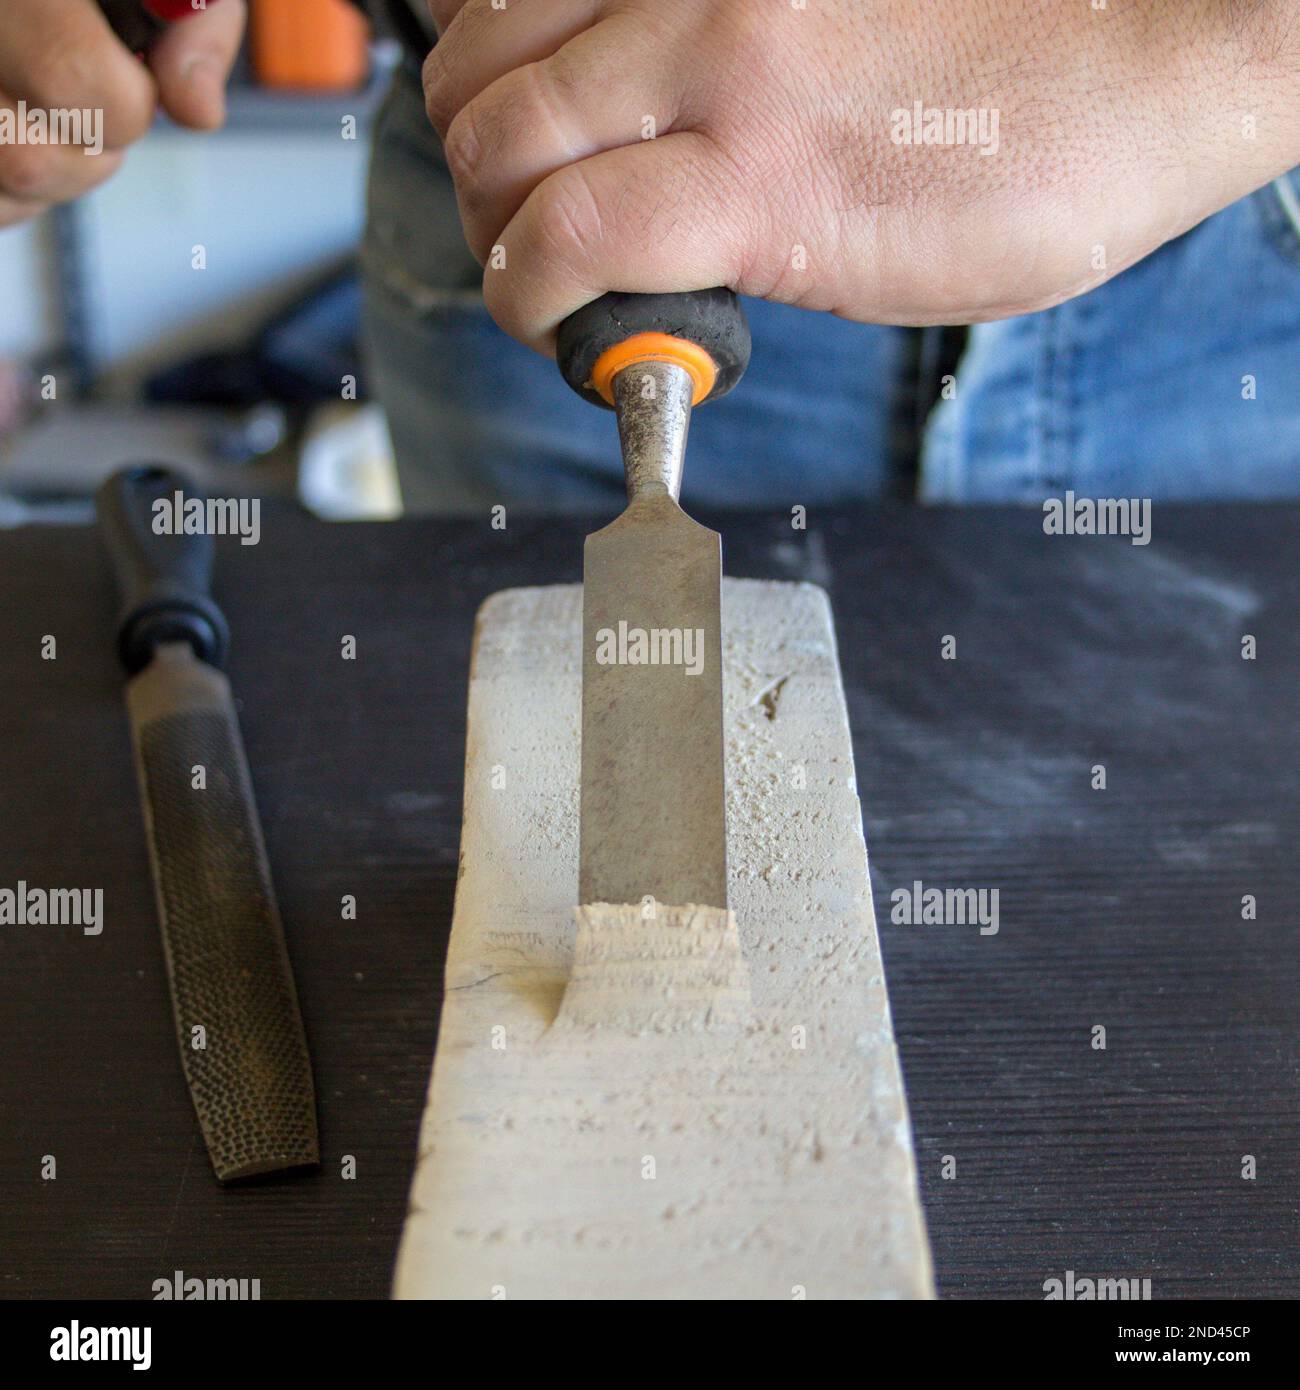 Image of a handyman craftsman's hands holding a carpenter's hammer and chisel while doing some work and carving on wood. DIY work in the laboratory. Stock Photo